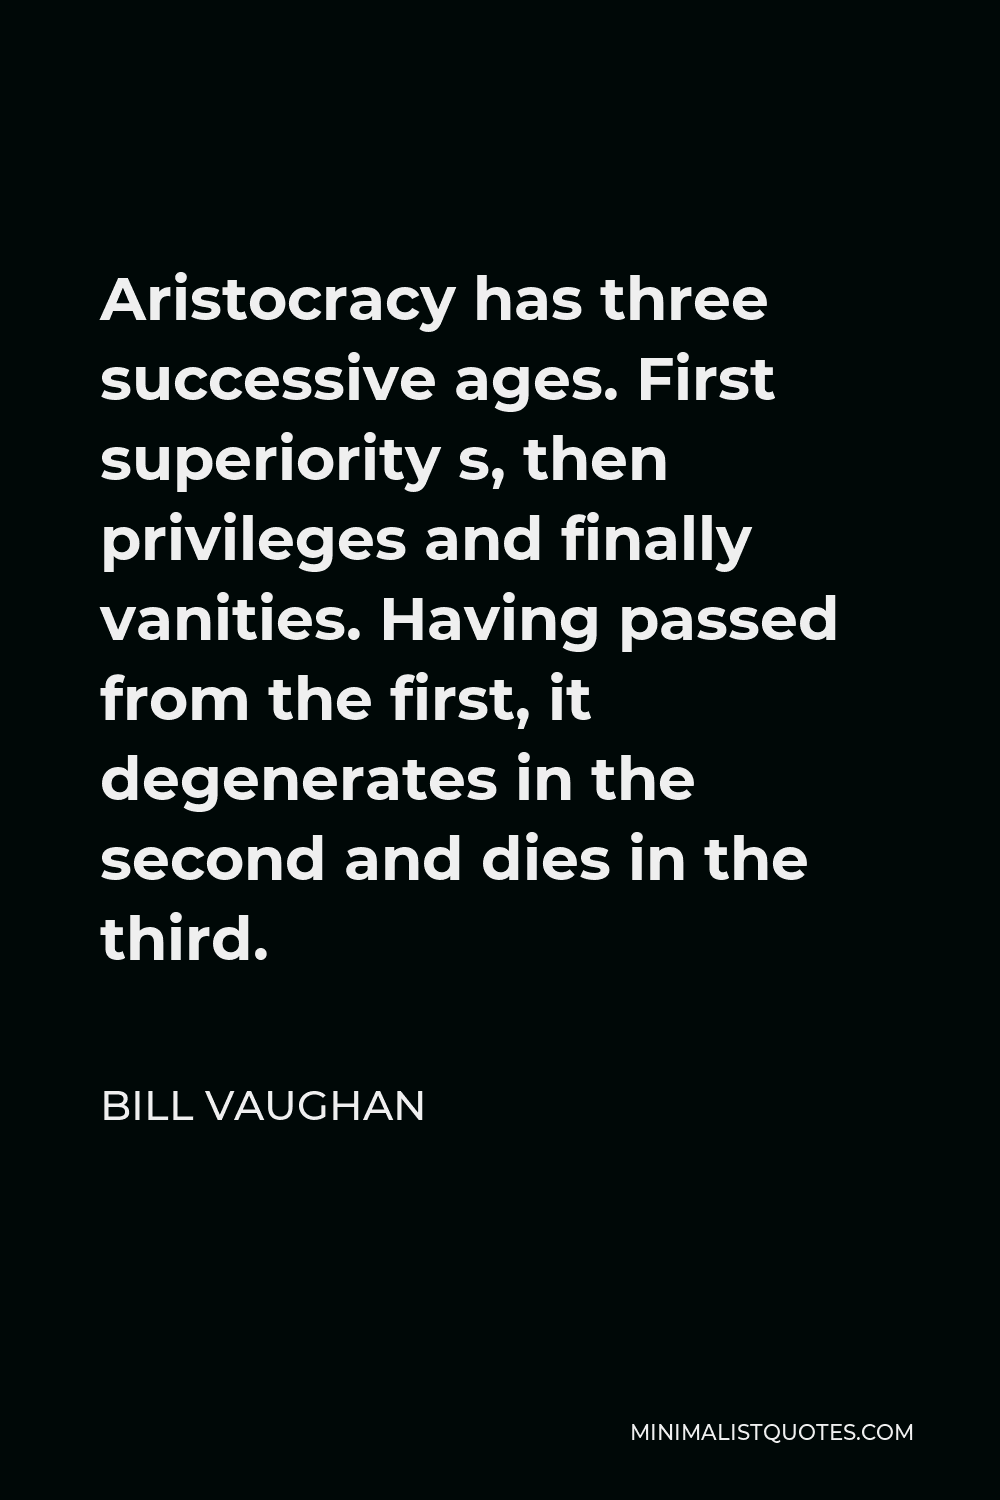 Bill Vaughan Quote - Aristocracy has three successive ages. First superiority s, then privileges and finally vanities. Having passed from the first, it degenerates in the second and dies in the third.